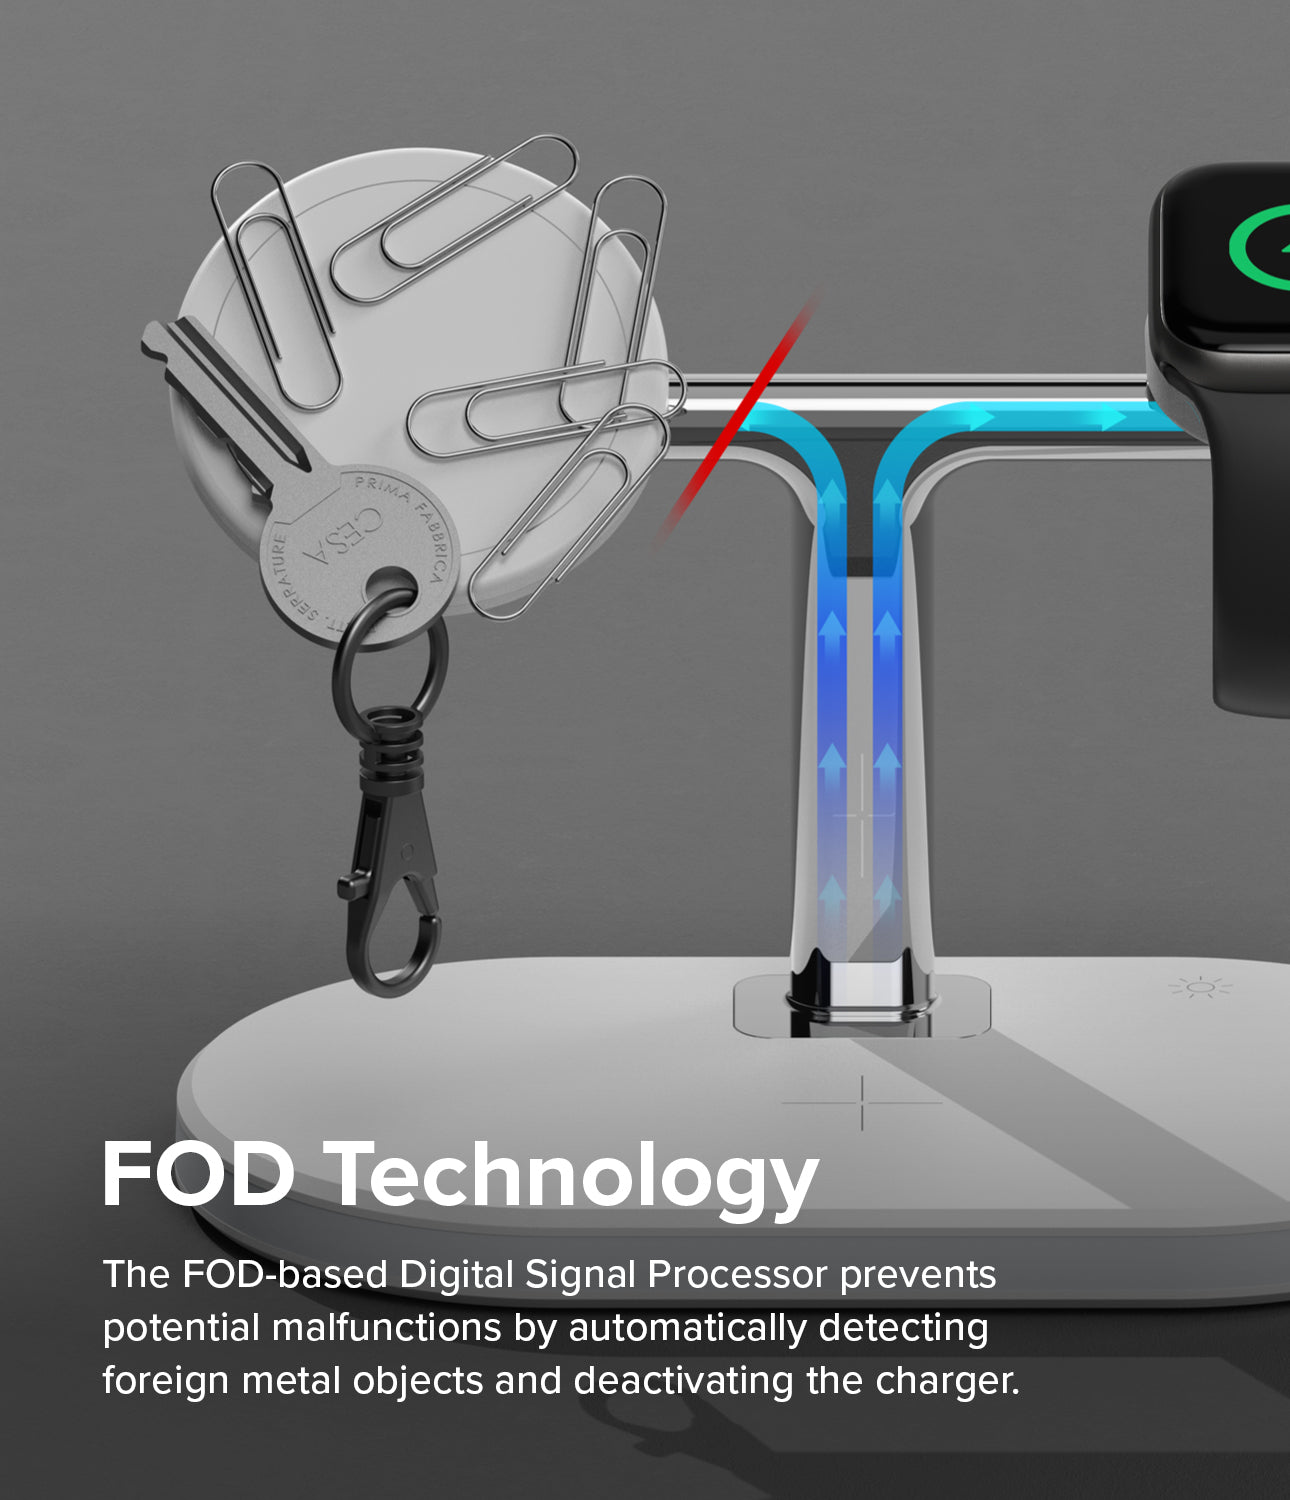 Ringke 3-in-1 Wireless Charger Stand - FOD technology. The FOD-based Digital Signal Processor prevents potential malfunctions by automatically detecting foreign metal objects and deactivating the charger.